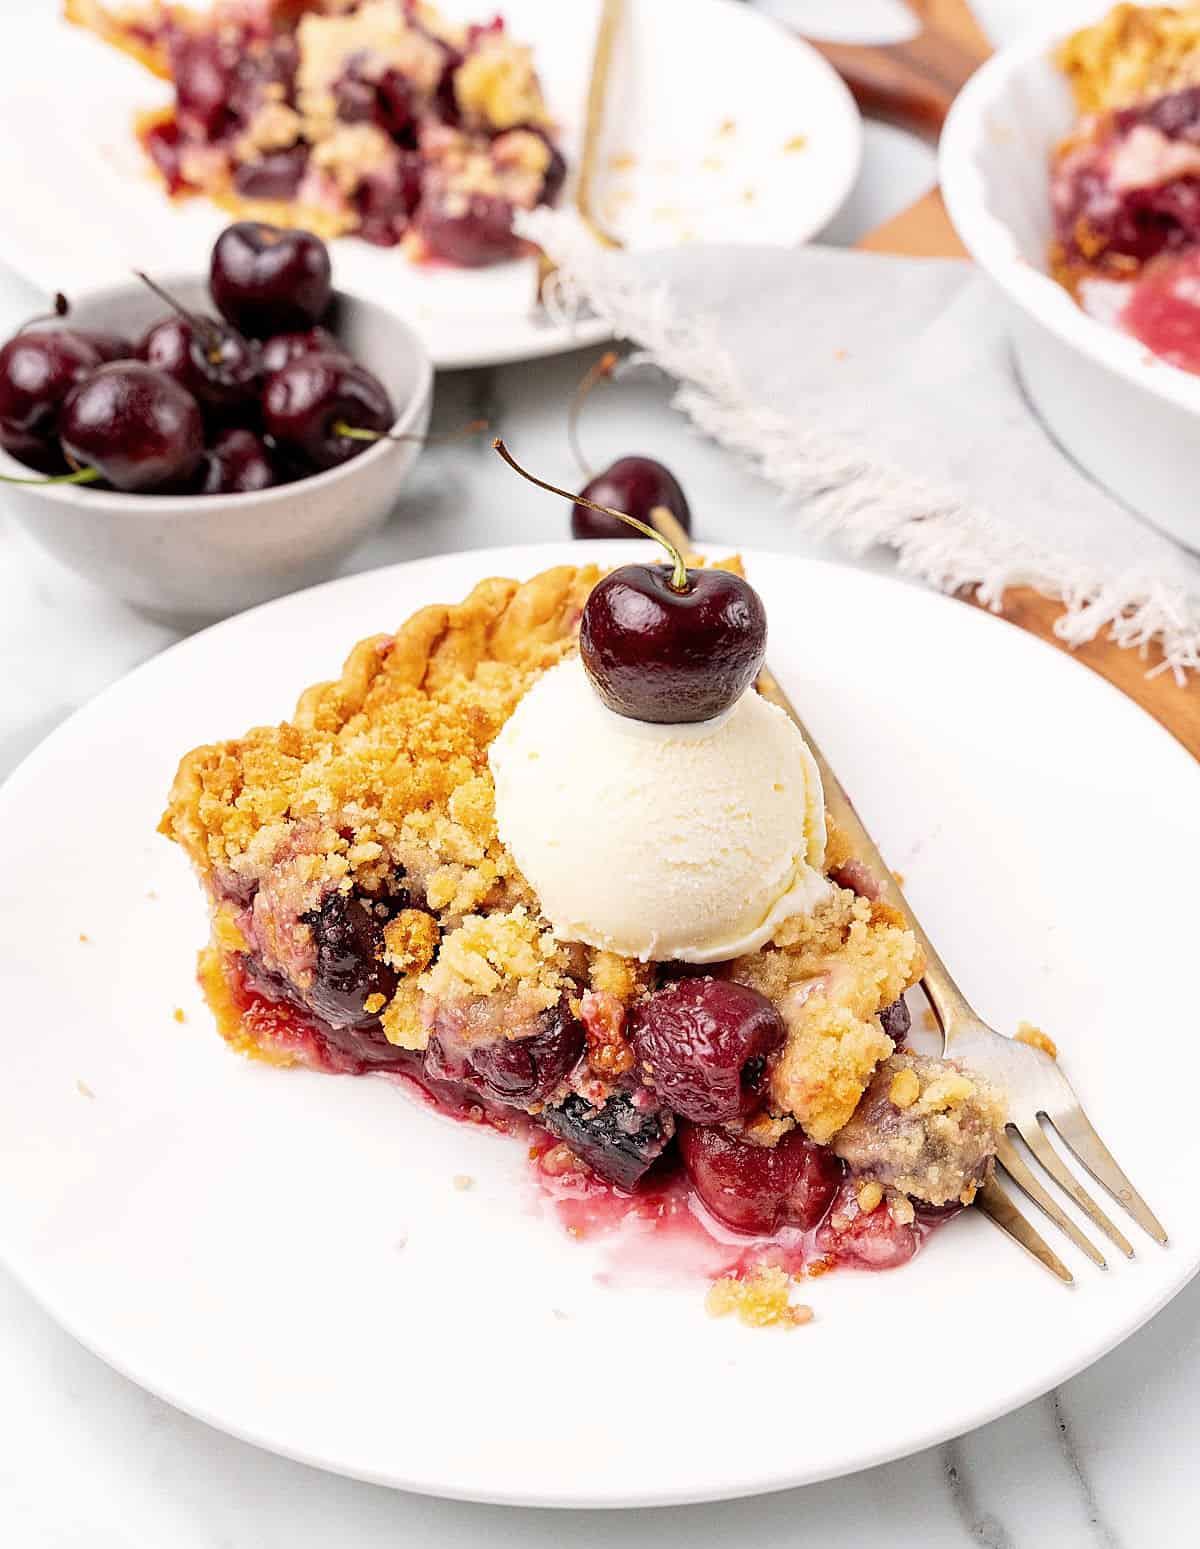 White plate with cherry crumb pie slice with ice cream, bowl with cherries and more pie in the background.